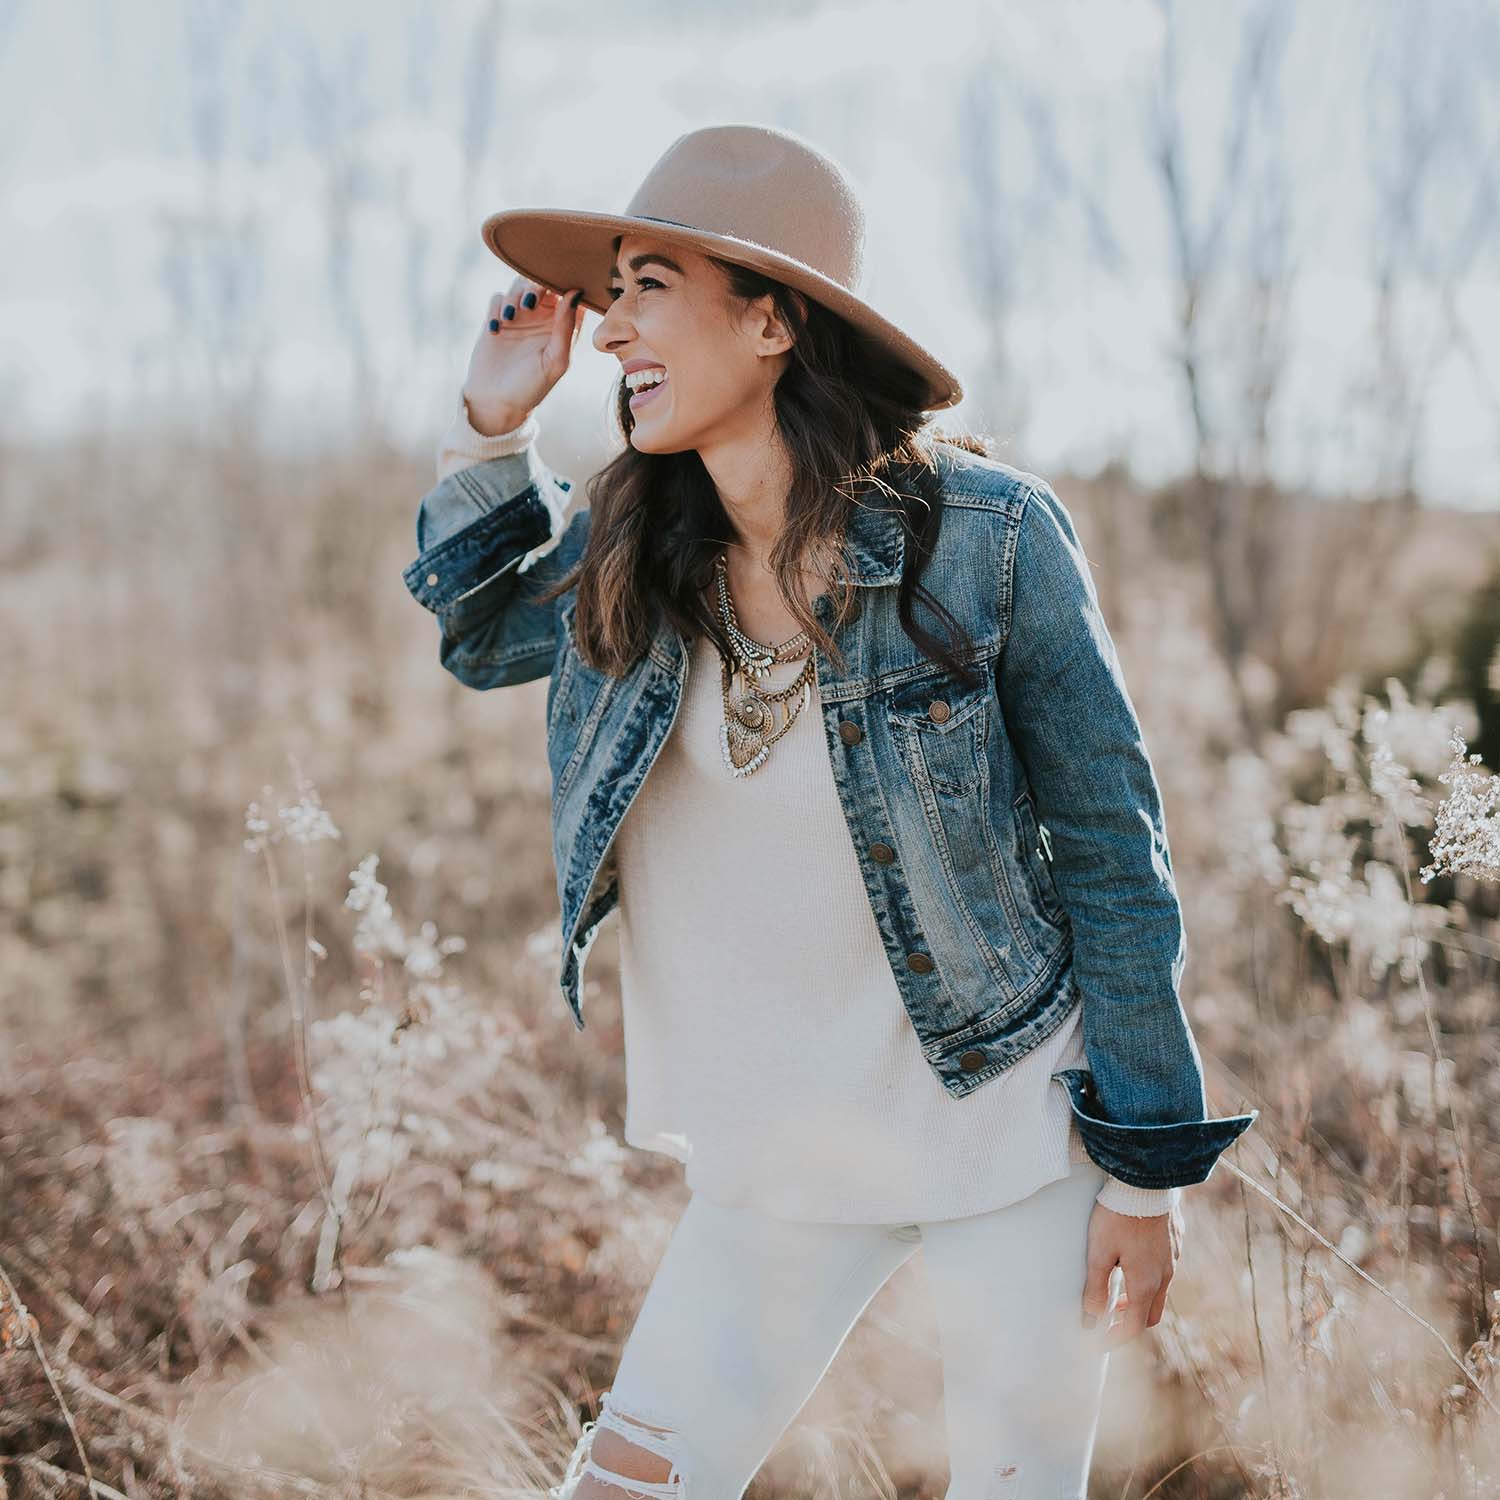 Woman in hat and jean jacket